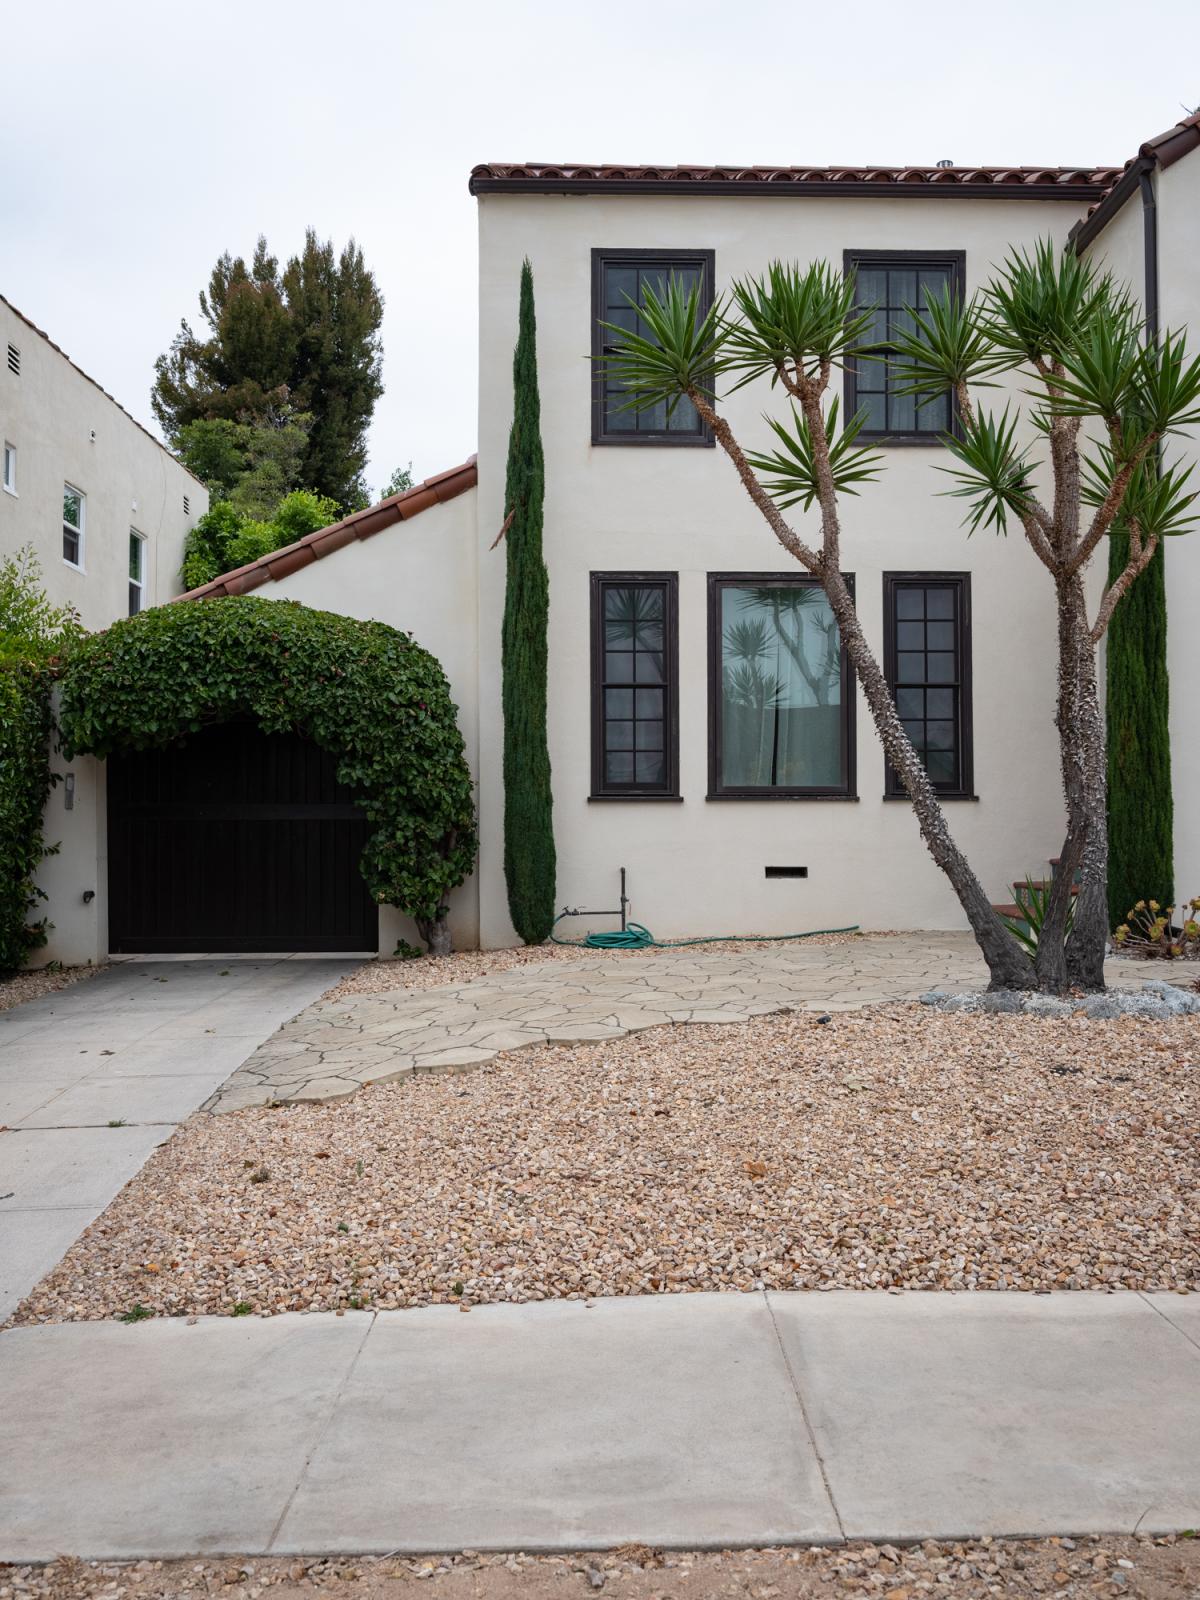 Water Cops - Wall Street Journal - A home in the mid-Wilshire neighborhood of Los Angeles,...